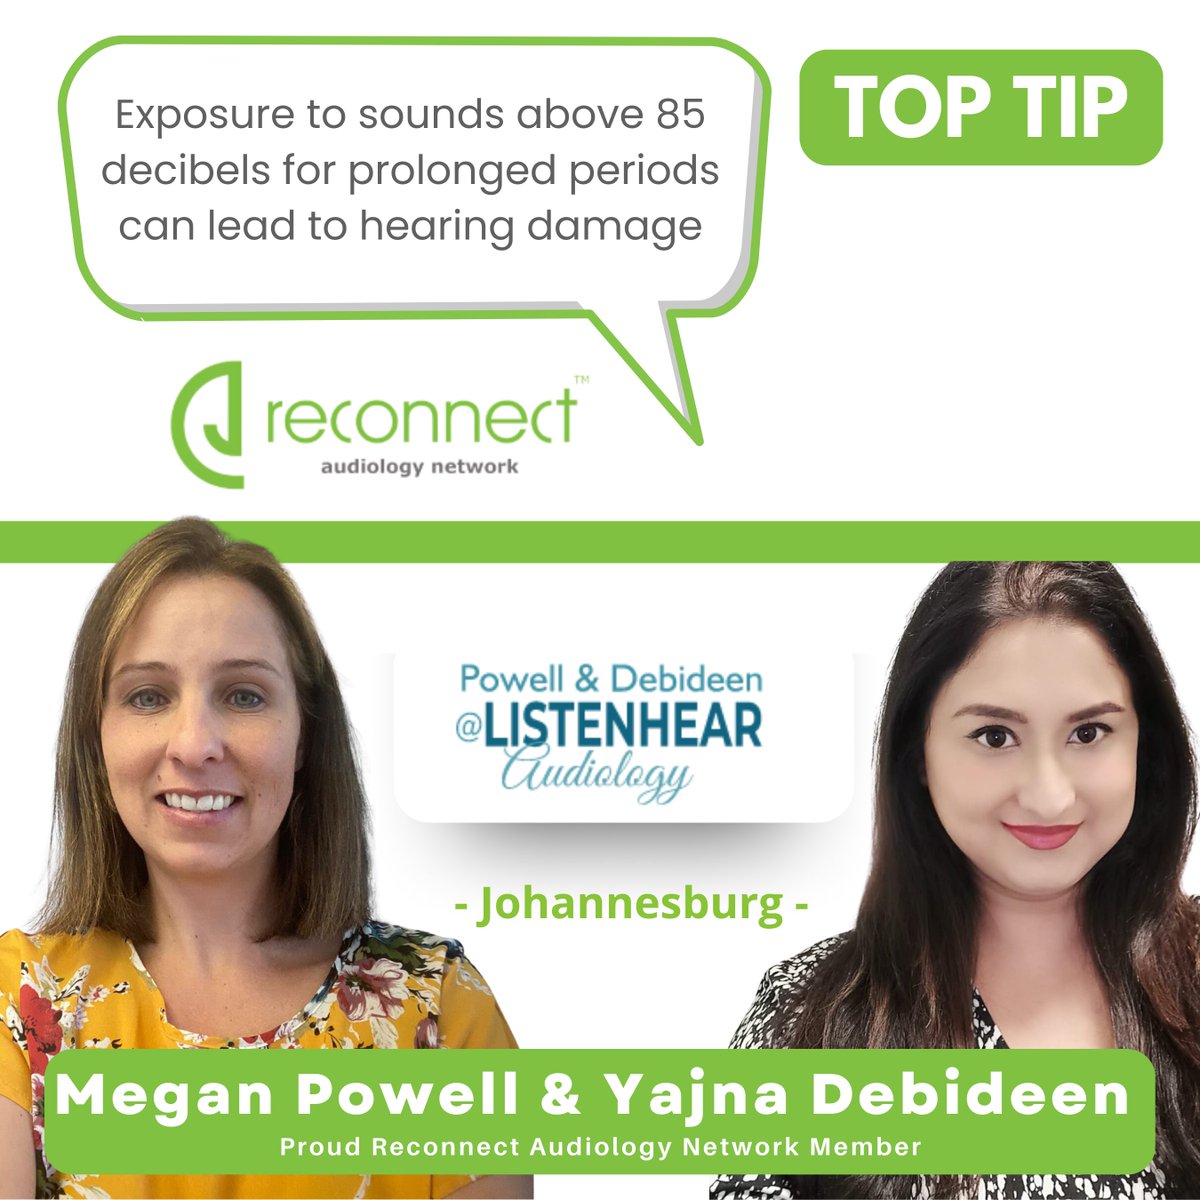 Today #Audiologist in #IndependentPractice Megan Powell and Yajna Debideen from Powell and Debideen at ListenHear Audiology from #Gauteng shares a tip about your #hearing health.

You can contact Megan Powell and Yajna Debideen here 📲 011 758 6550